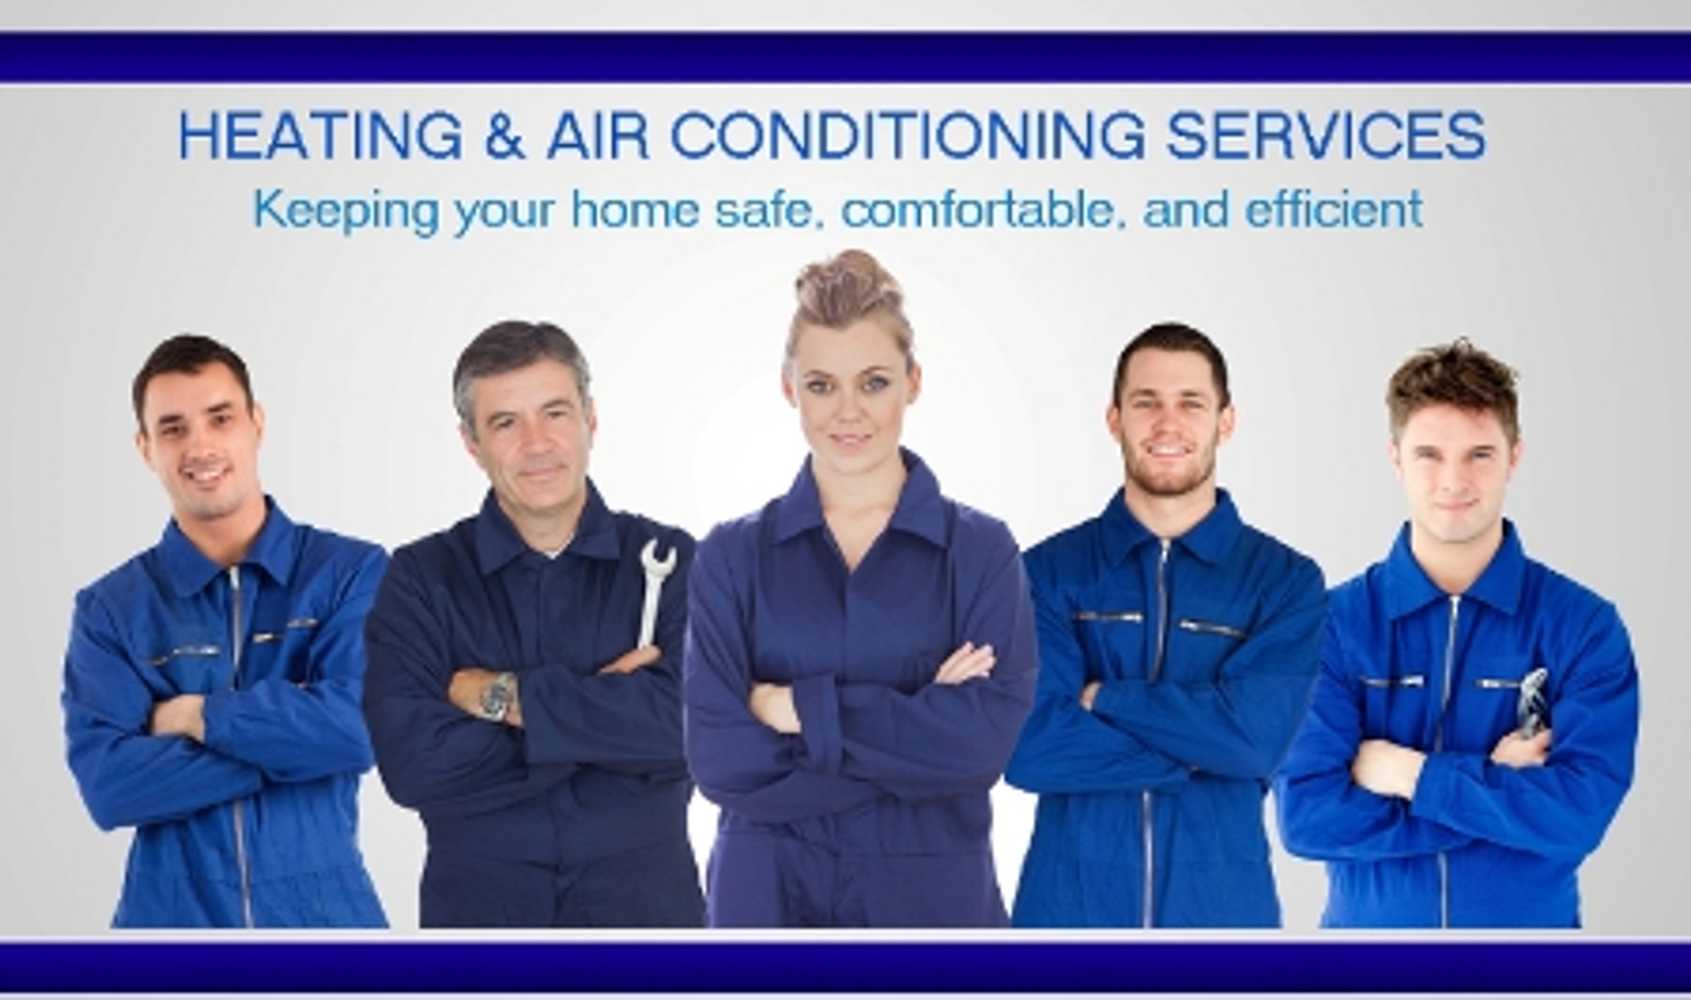 Photo(s) from E. Smith Heating & Air Conditioning, Inc.